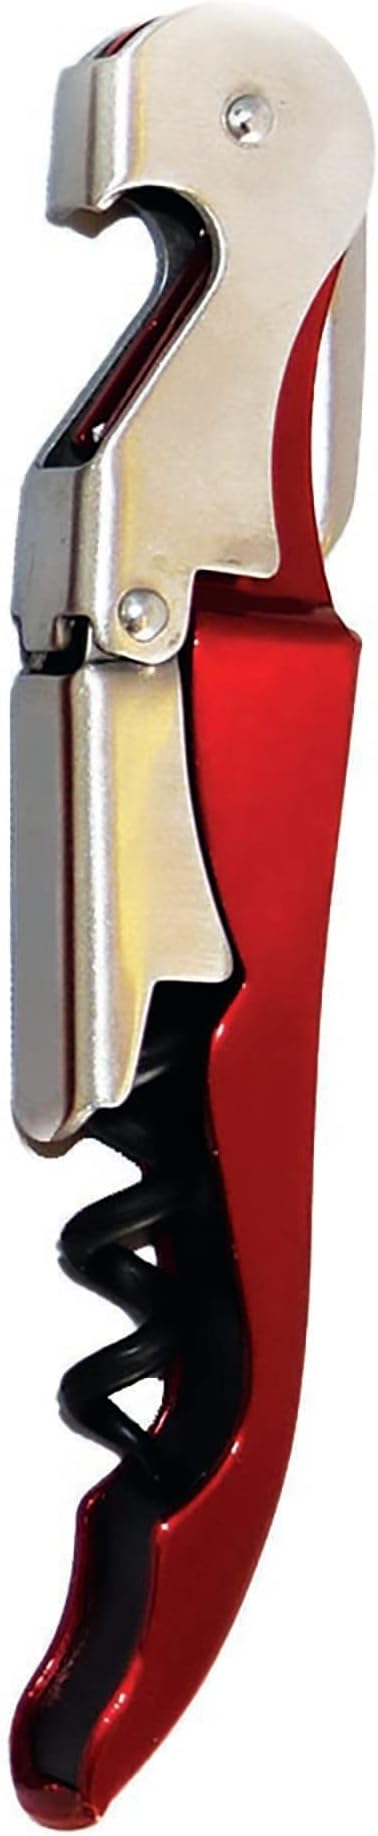 Cuisivin - Red with white Canada Print Corkscrew - 4027CAN